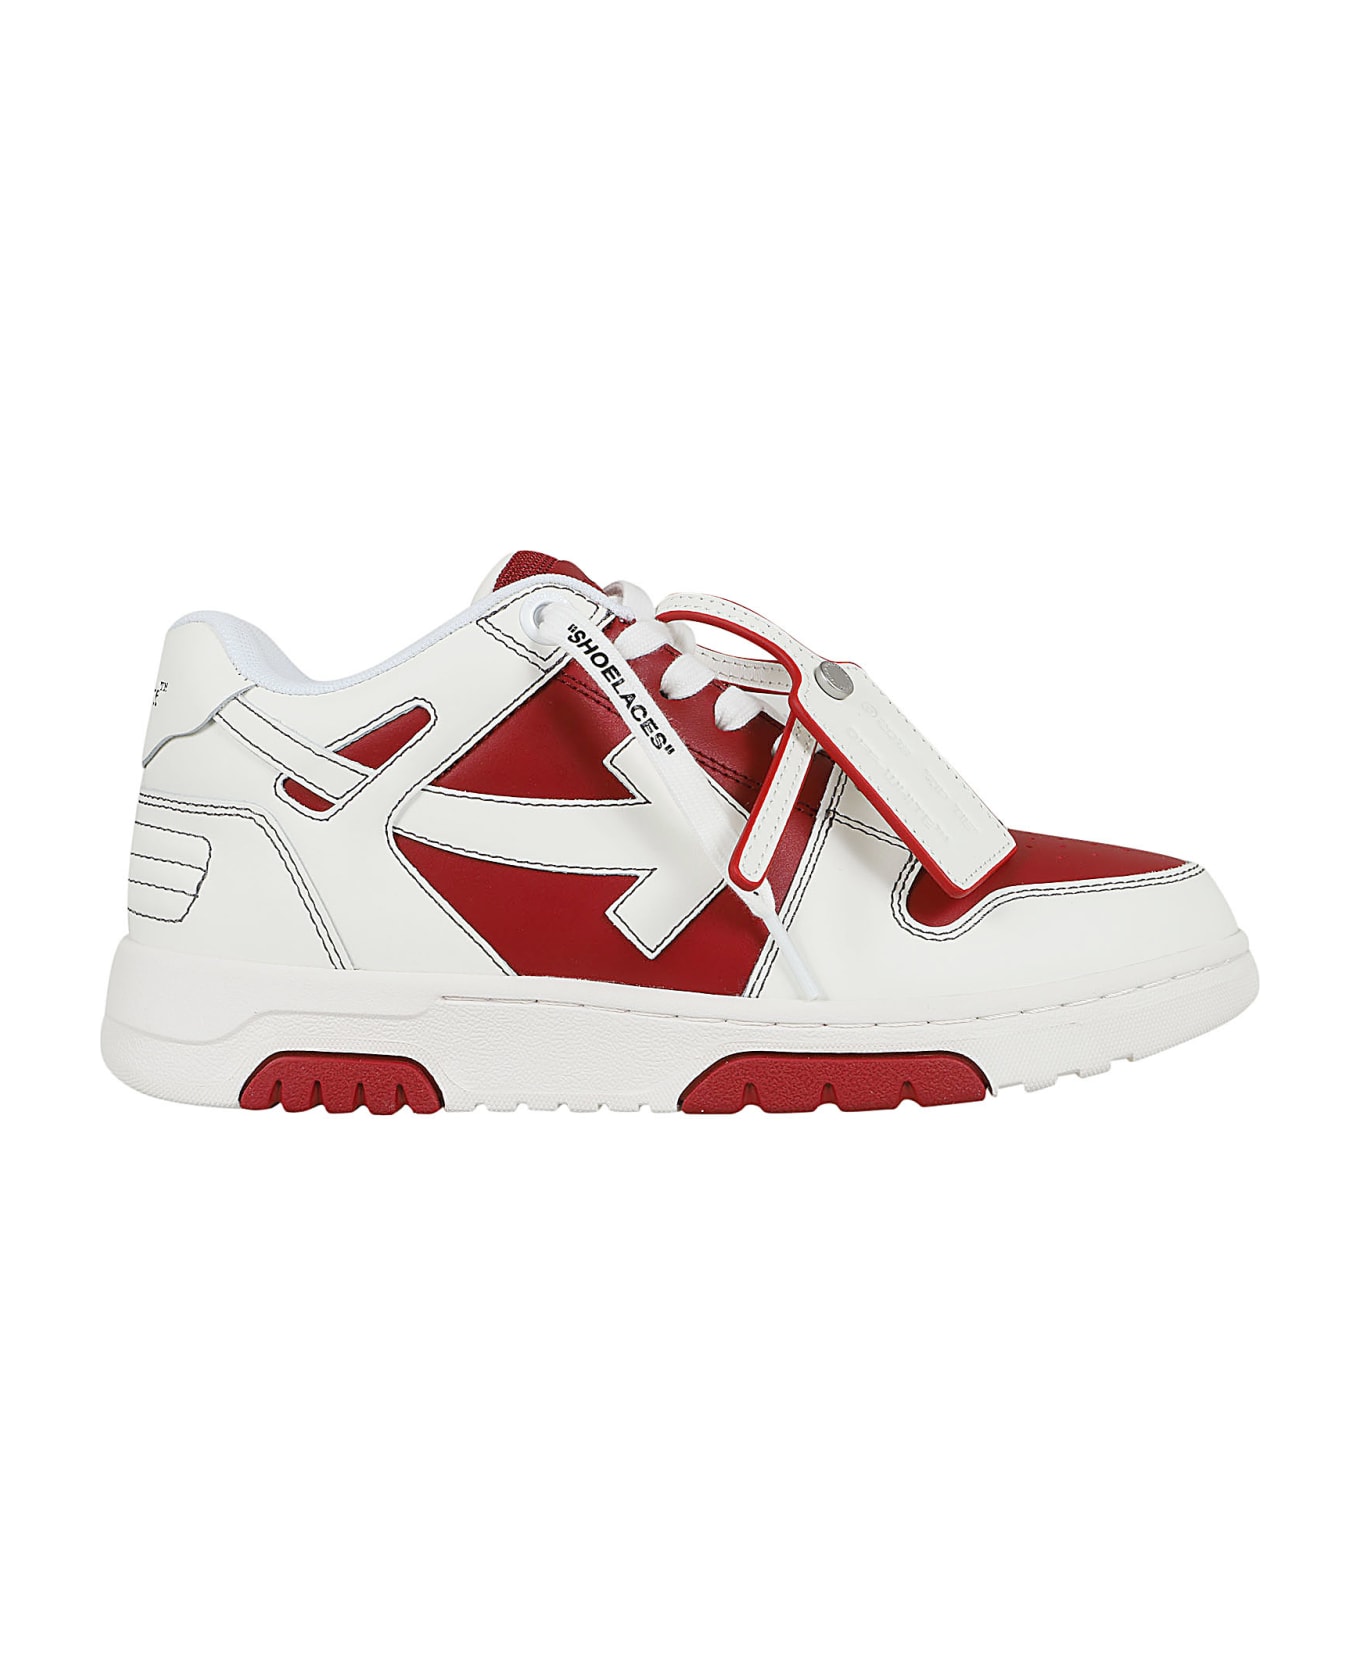 Off-White Out Of Office Calf Leather Brick Red Whi - Brick Red Whi